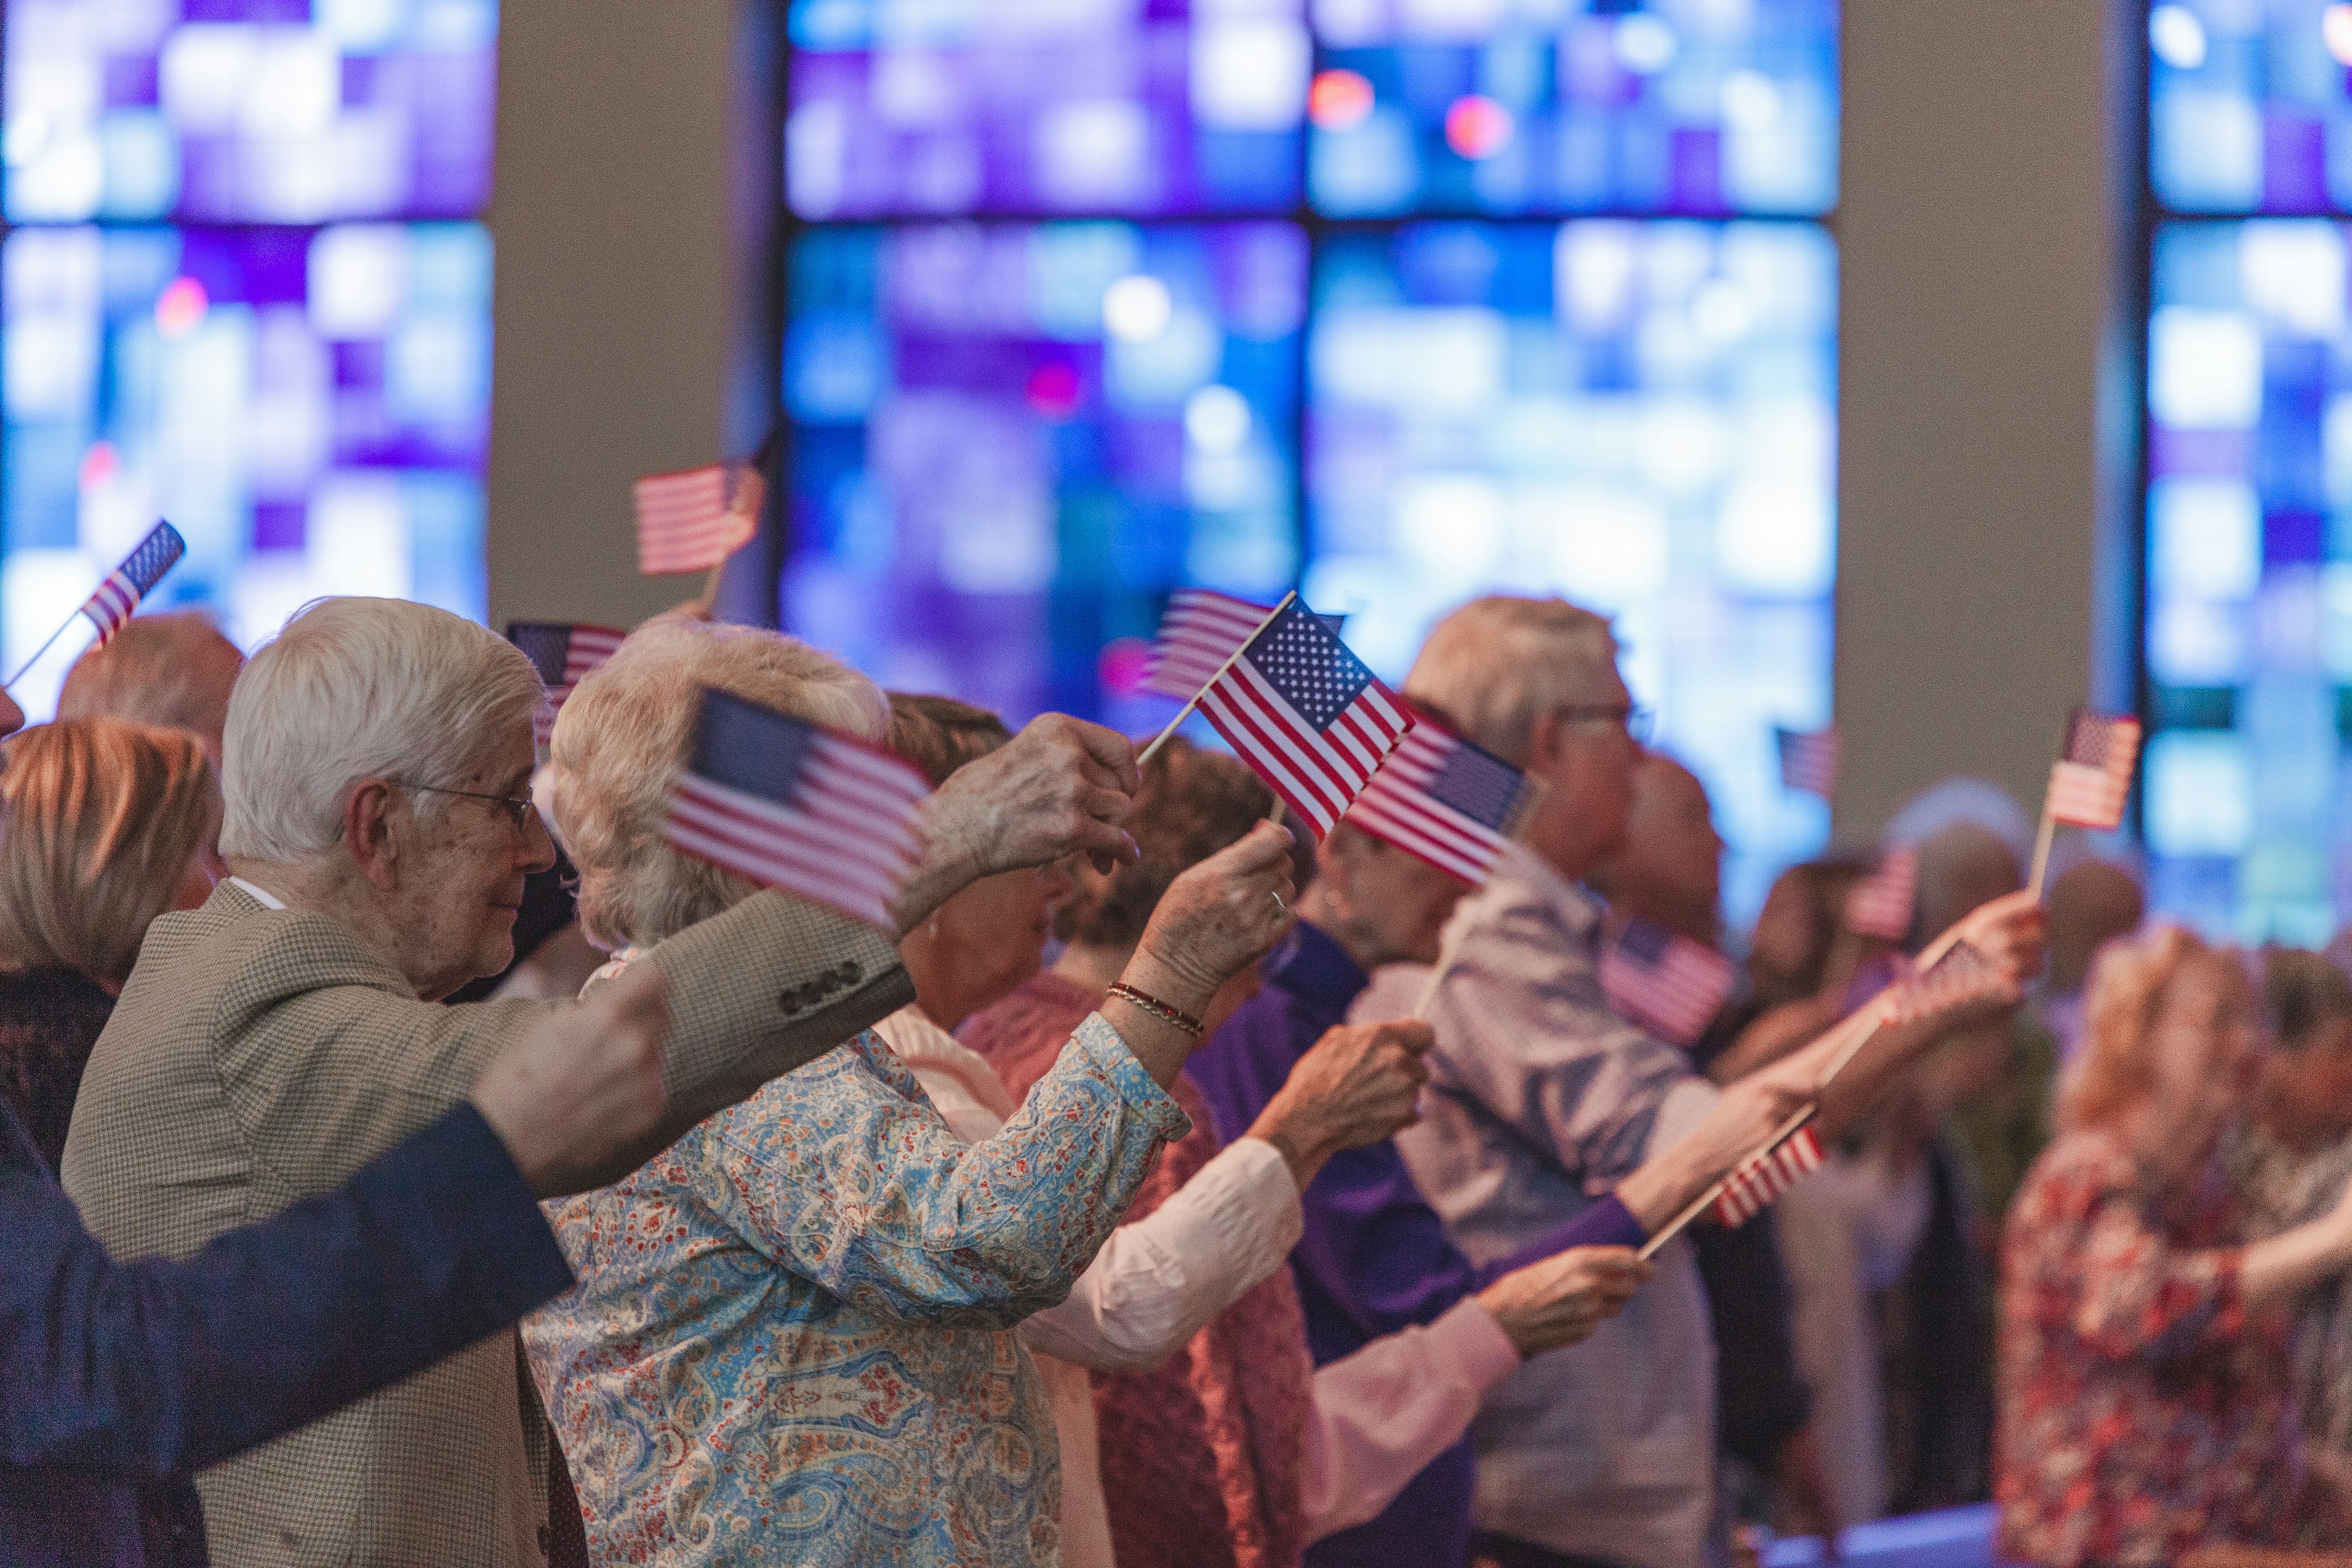 Elderly men and women waving tiny American flags at an indoor gathering.